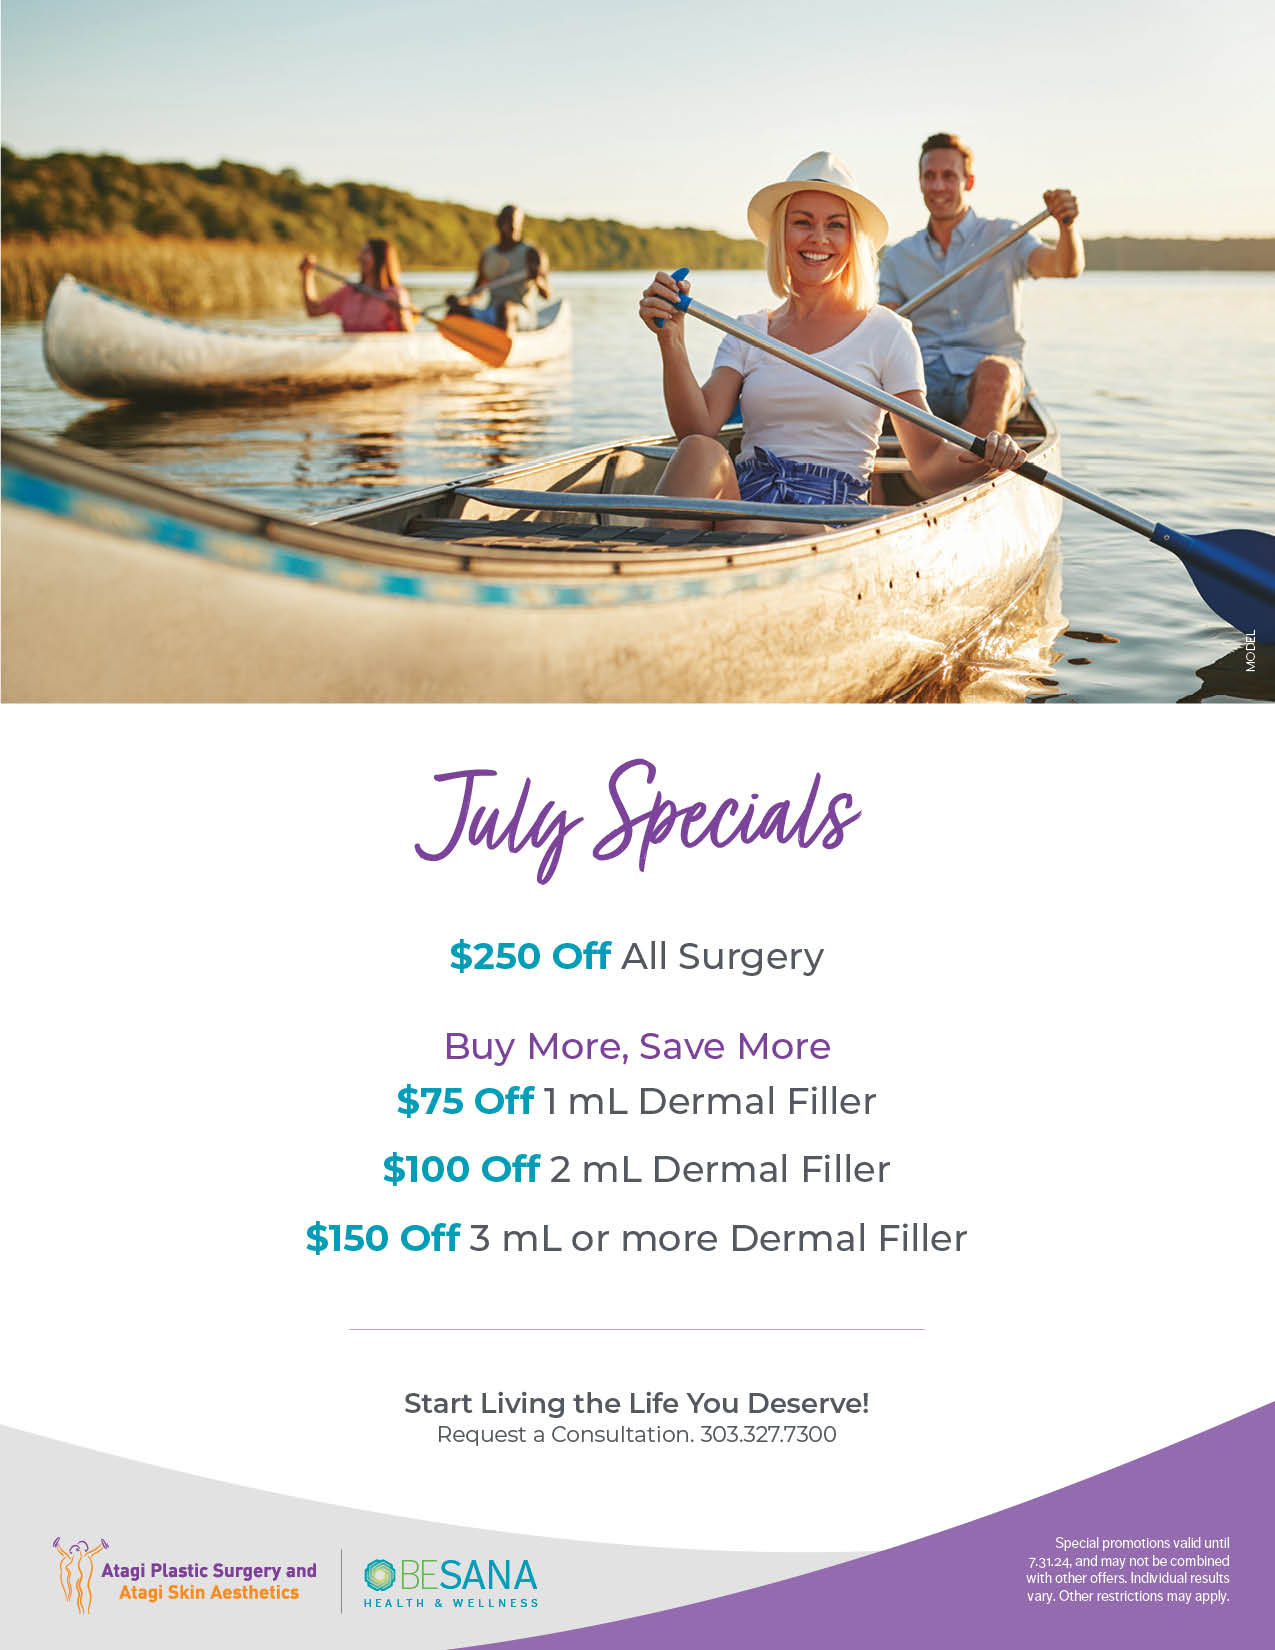 July Specials $250 Off All Surgery Buy More, Save More $75 Off 1 mL Dermal Filler $100 Off 2 mL Dermal Filler $150 Off 3 mL or more Dermal Filler